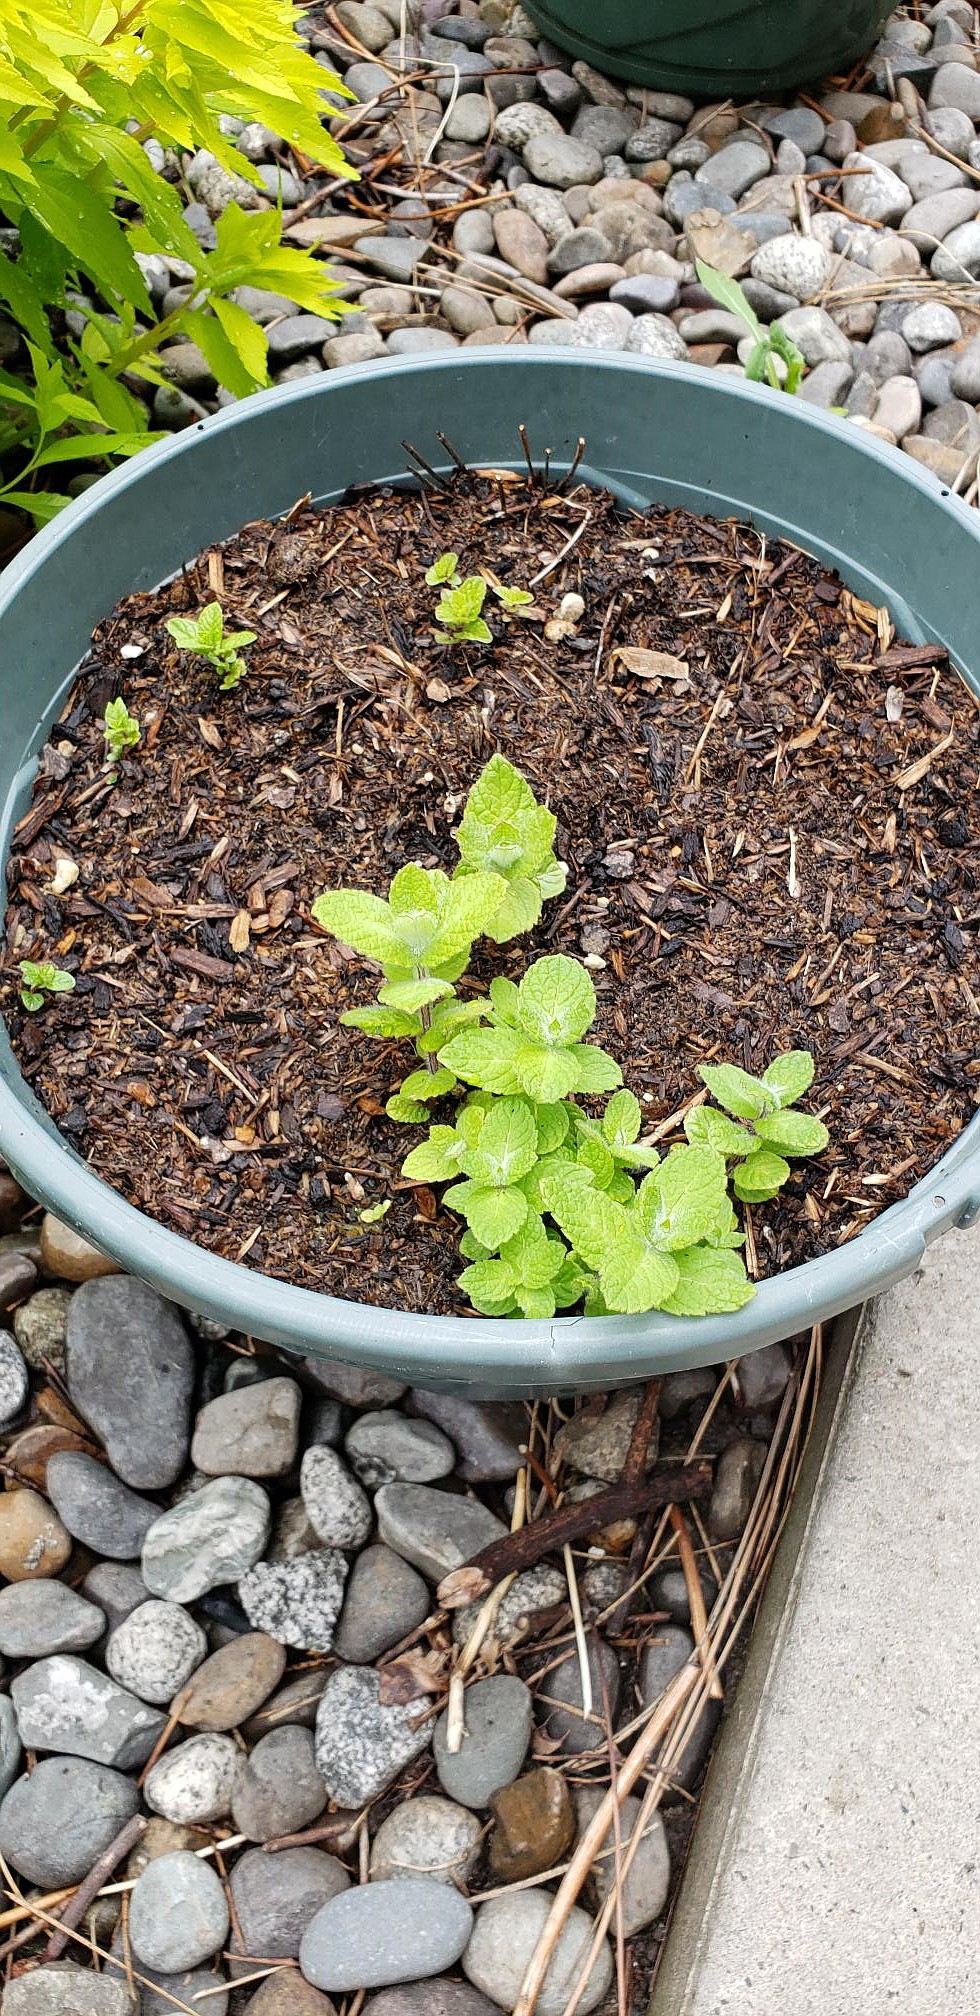 Mint is a hardy herb that will survive our cold Idaho winters.